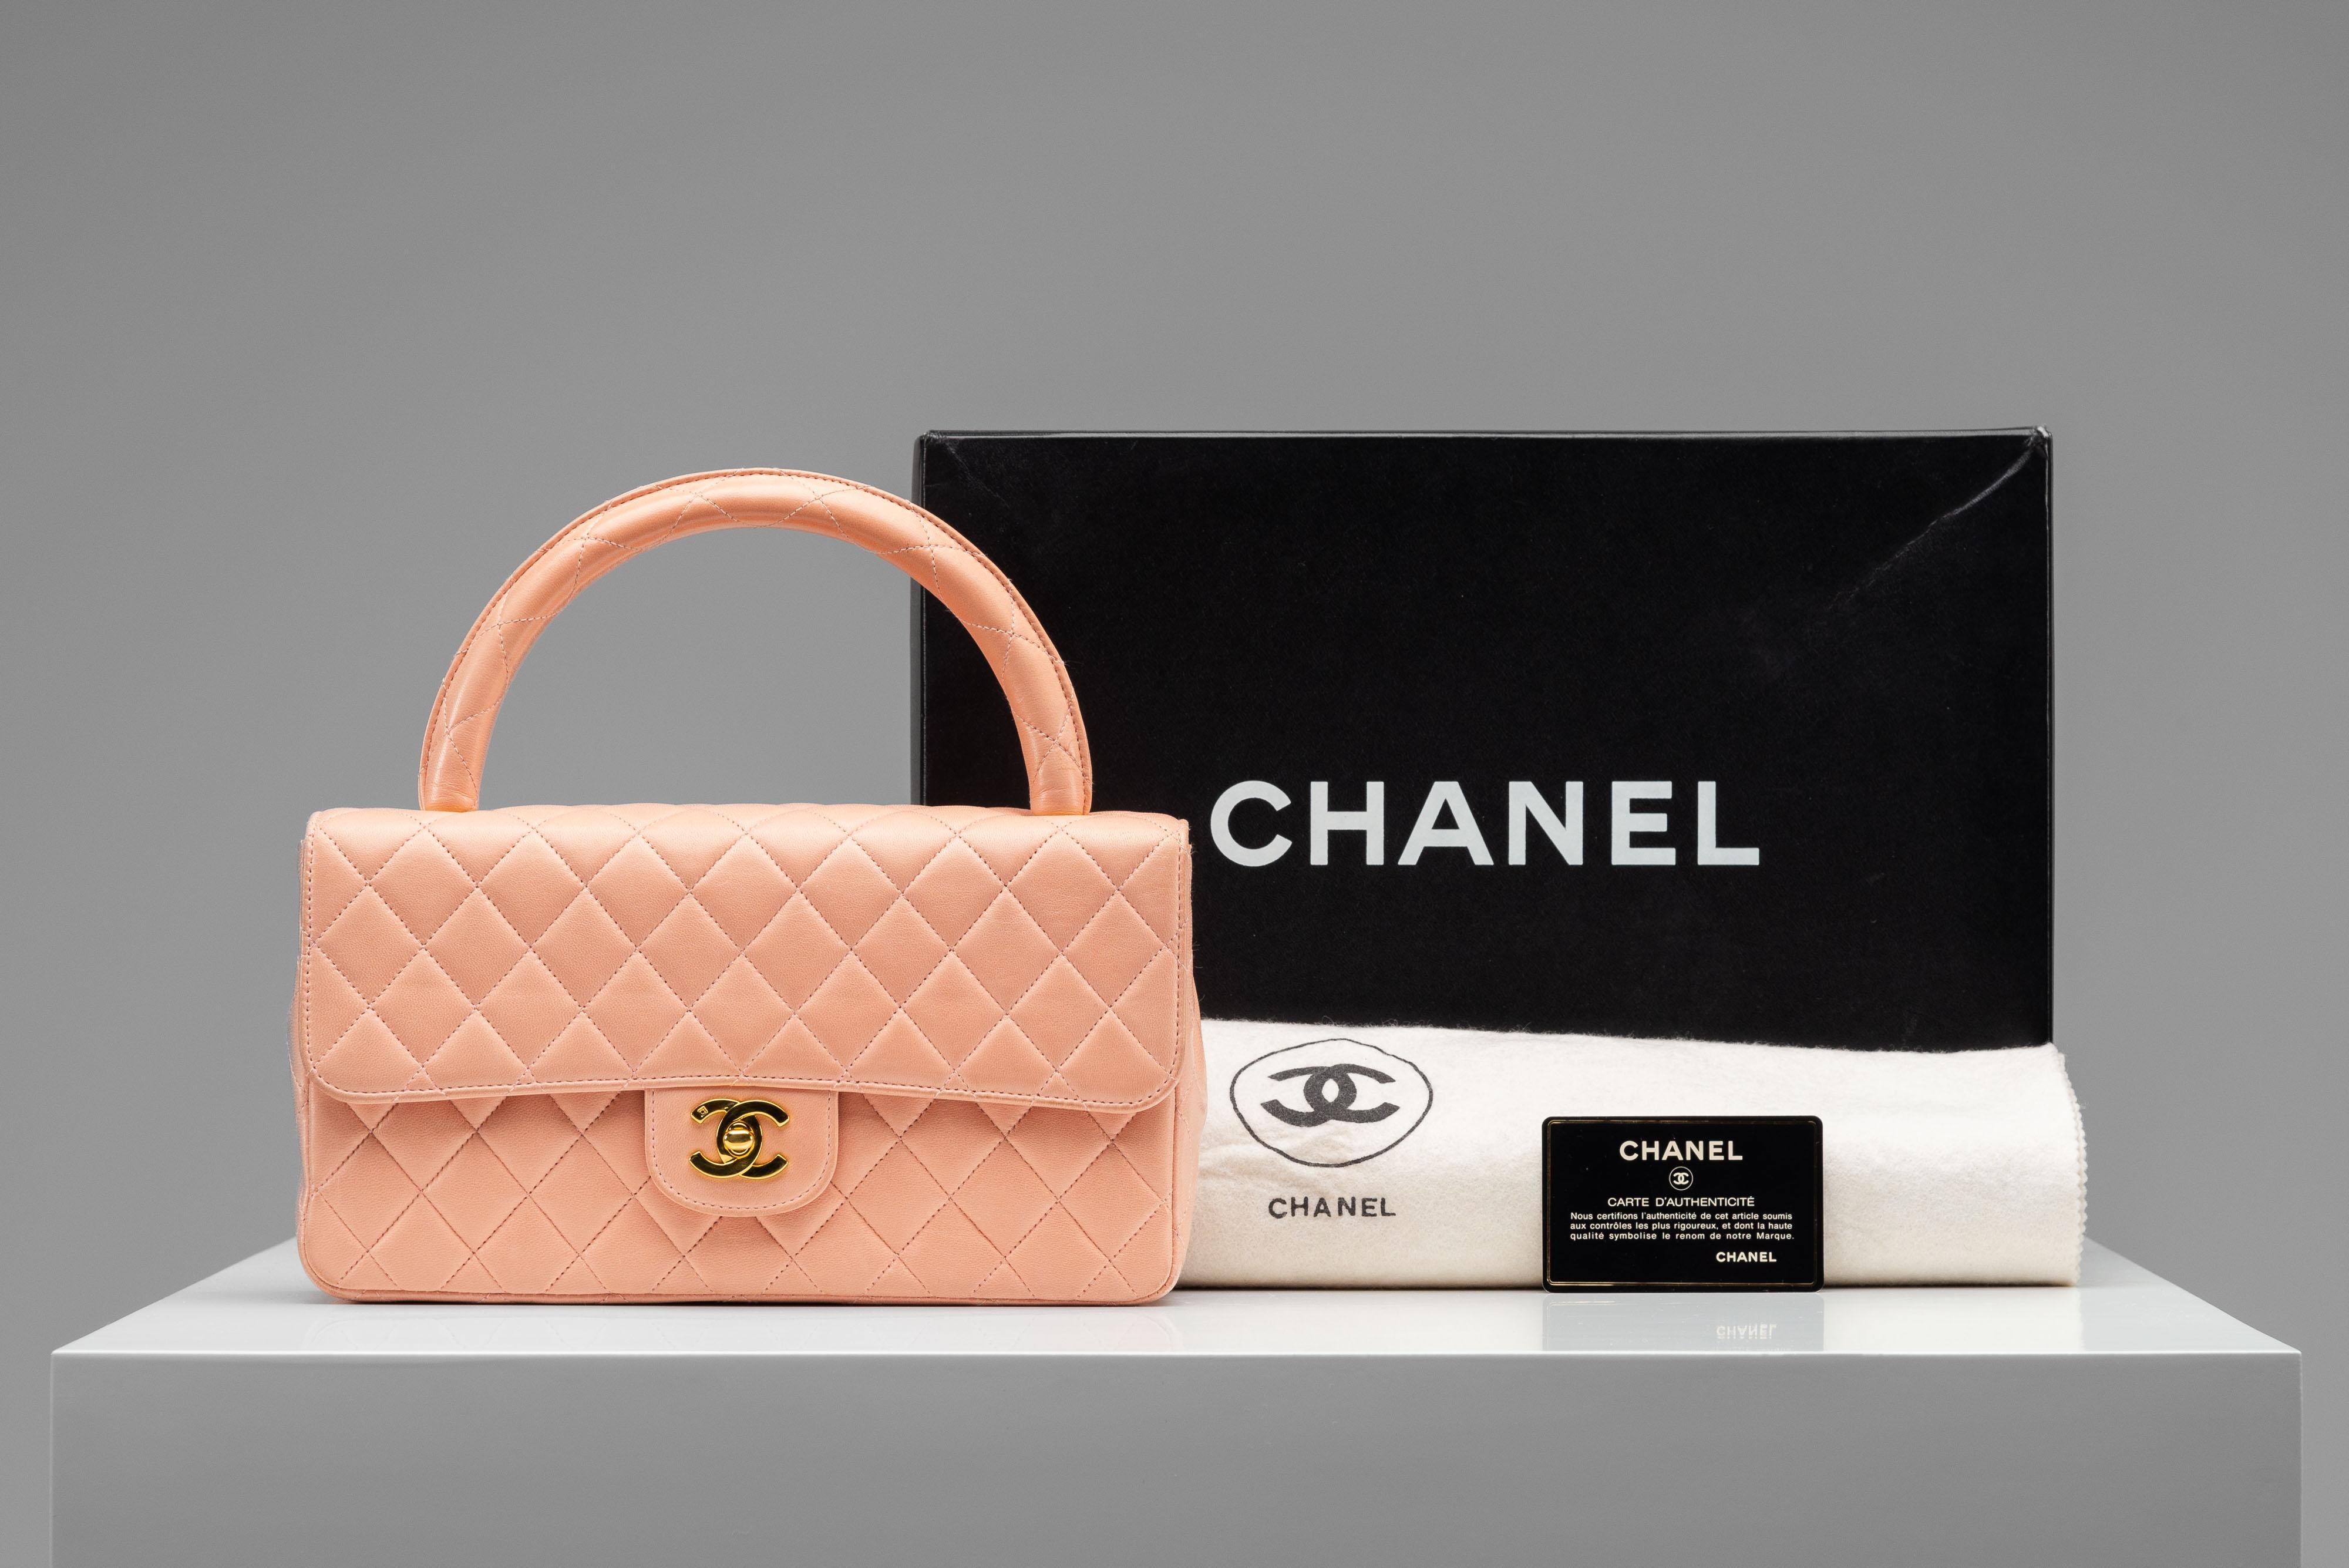 From the collection of SAVINETI we offer this Chanel Top Handle Bag:
-    Brand: Chanel
-    Model: Top Handle Bag
-    Color: Pink/ Peach
-    Year: 1994-1996
-    Serial number: 3285326
-    Condition: Very Good Original Condition 
-    Materials: